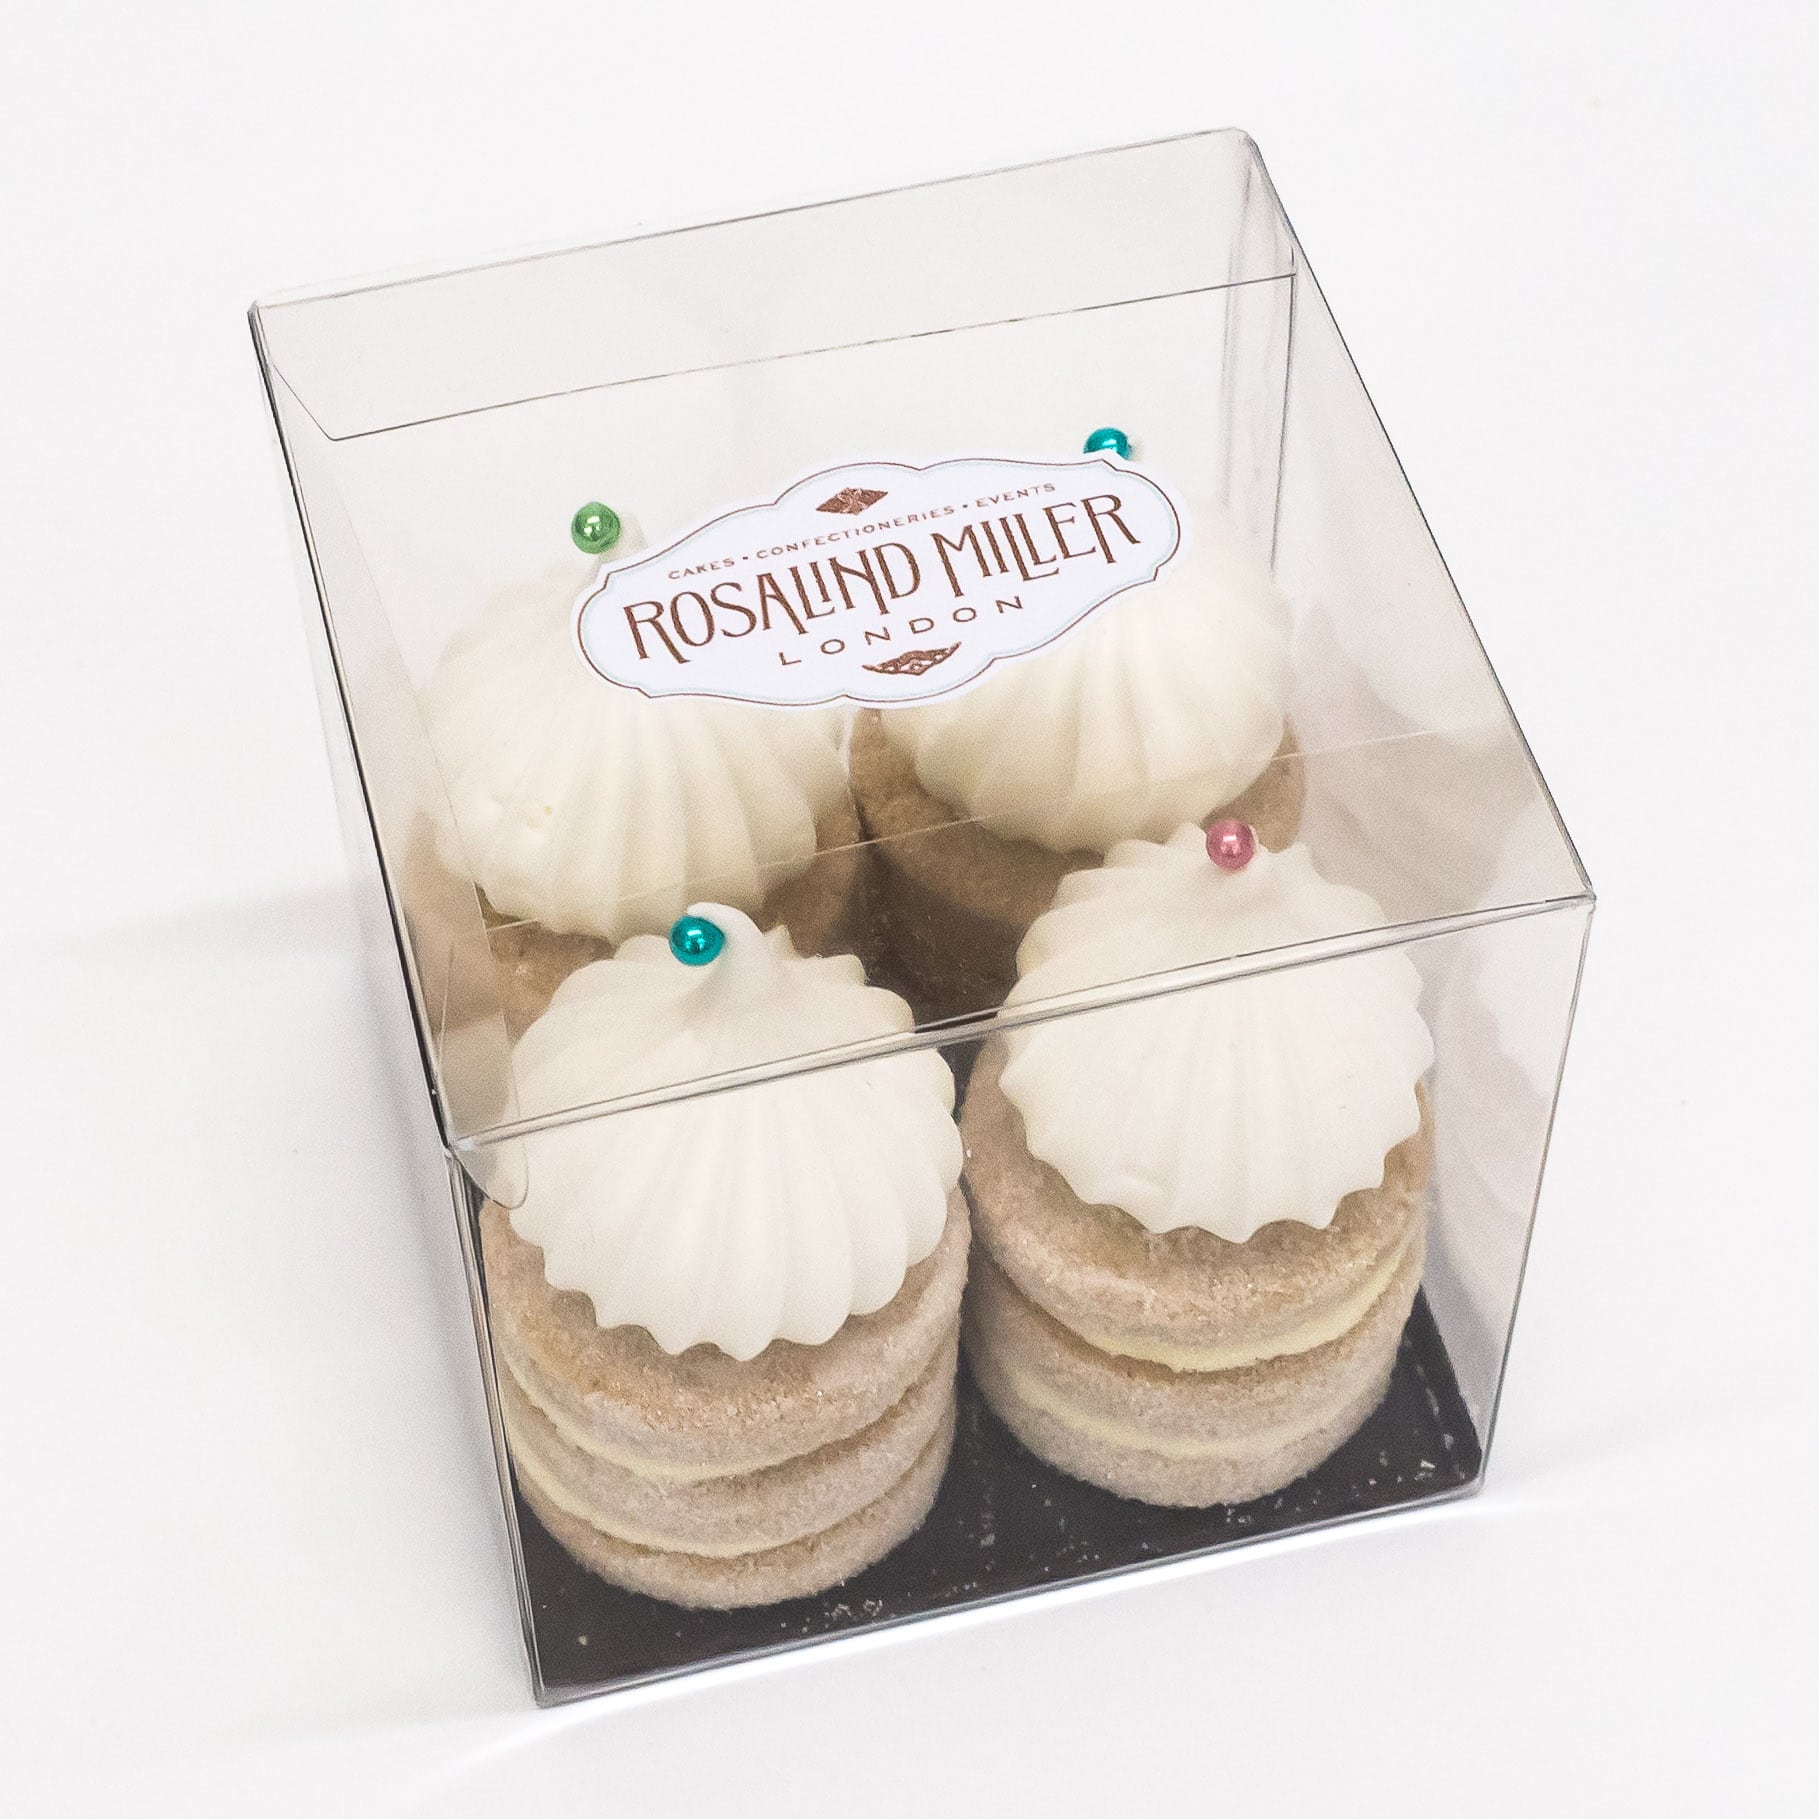 Corporate Boxed Cookies with Meringues by Rosalind Miller Cakes London